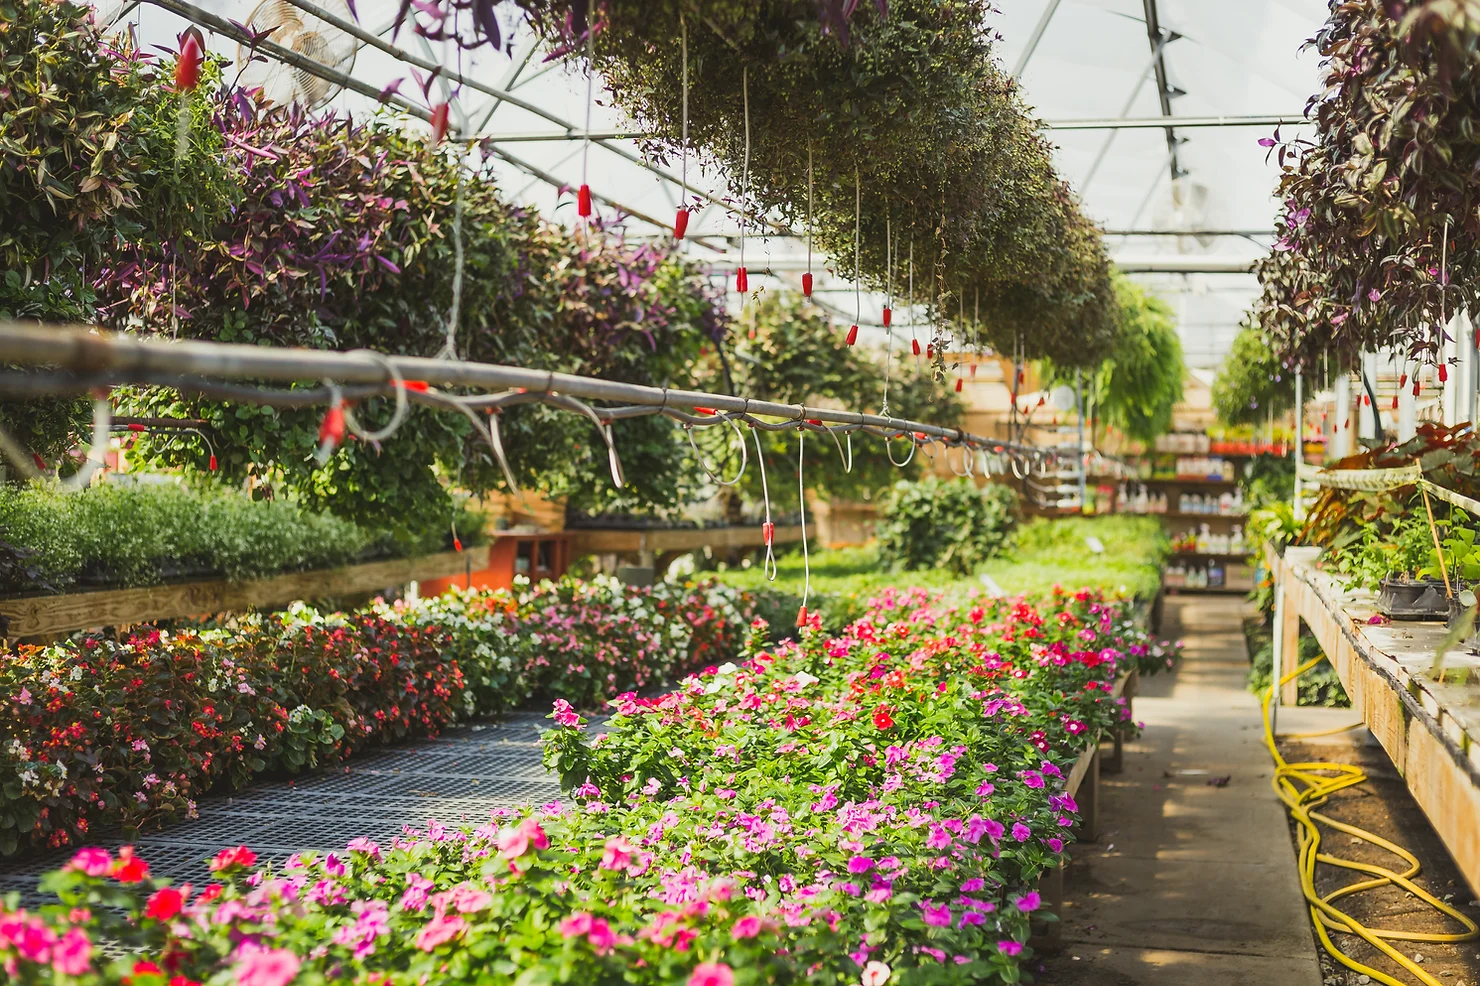 The beautiful flowers and plants inside of the Belmont County greenhouse and nursery